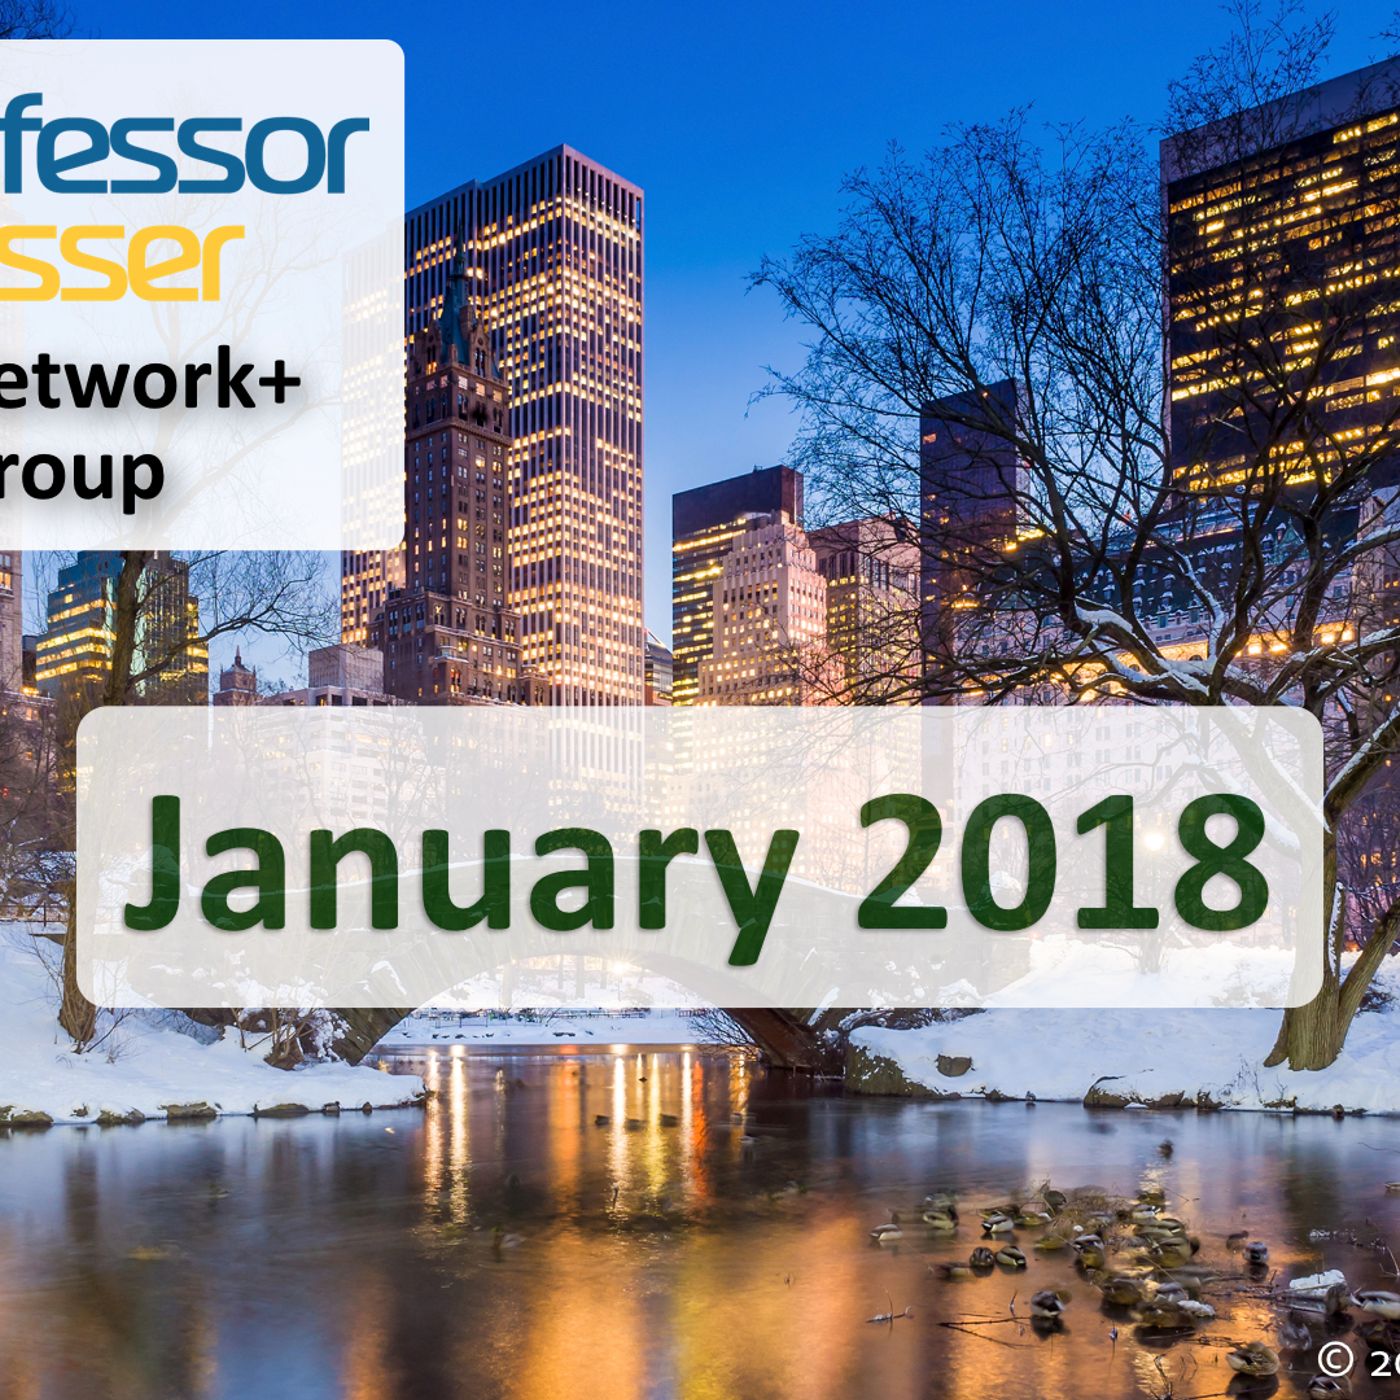 Professor Messer's Network+ Study Group After Show - January 2018